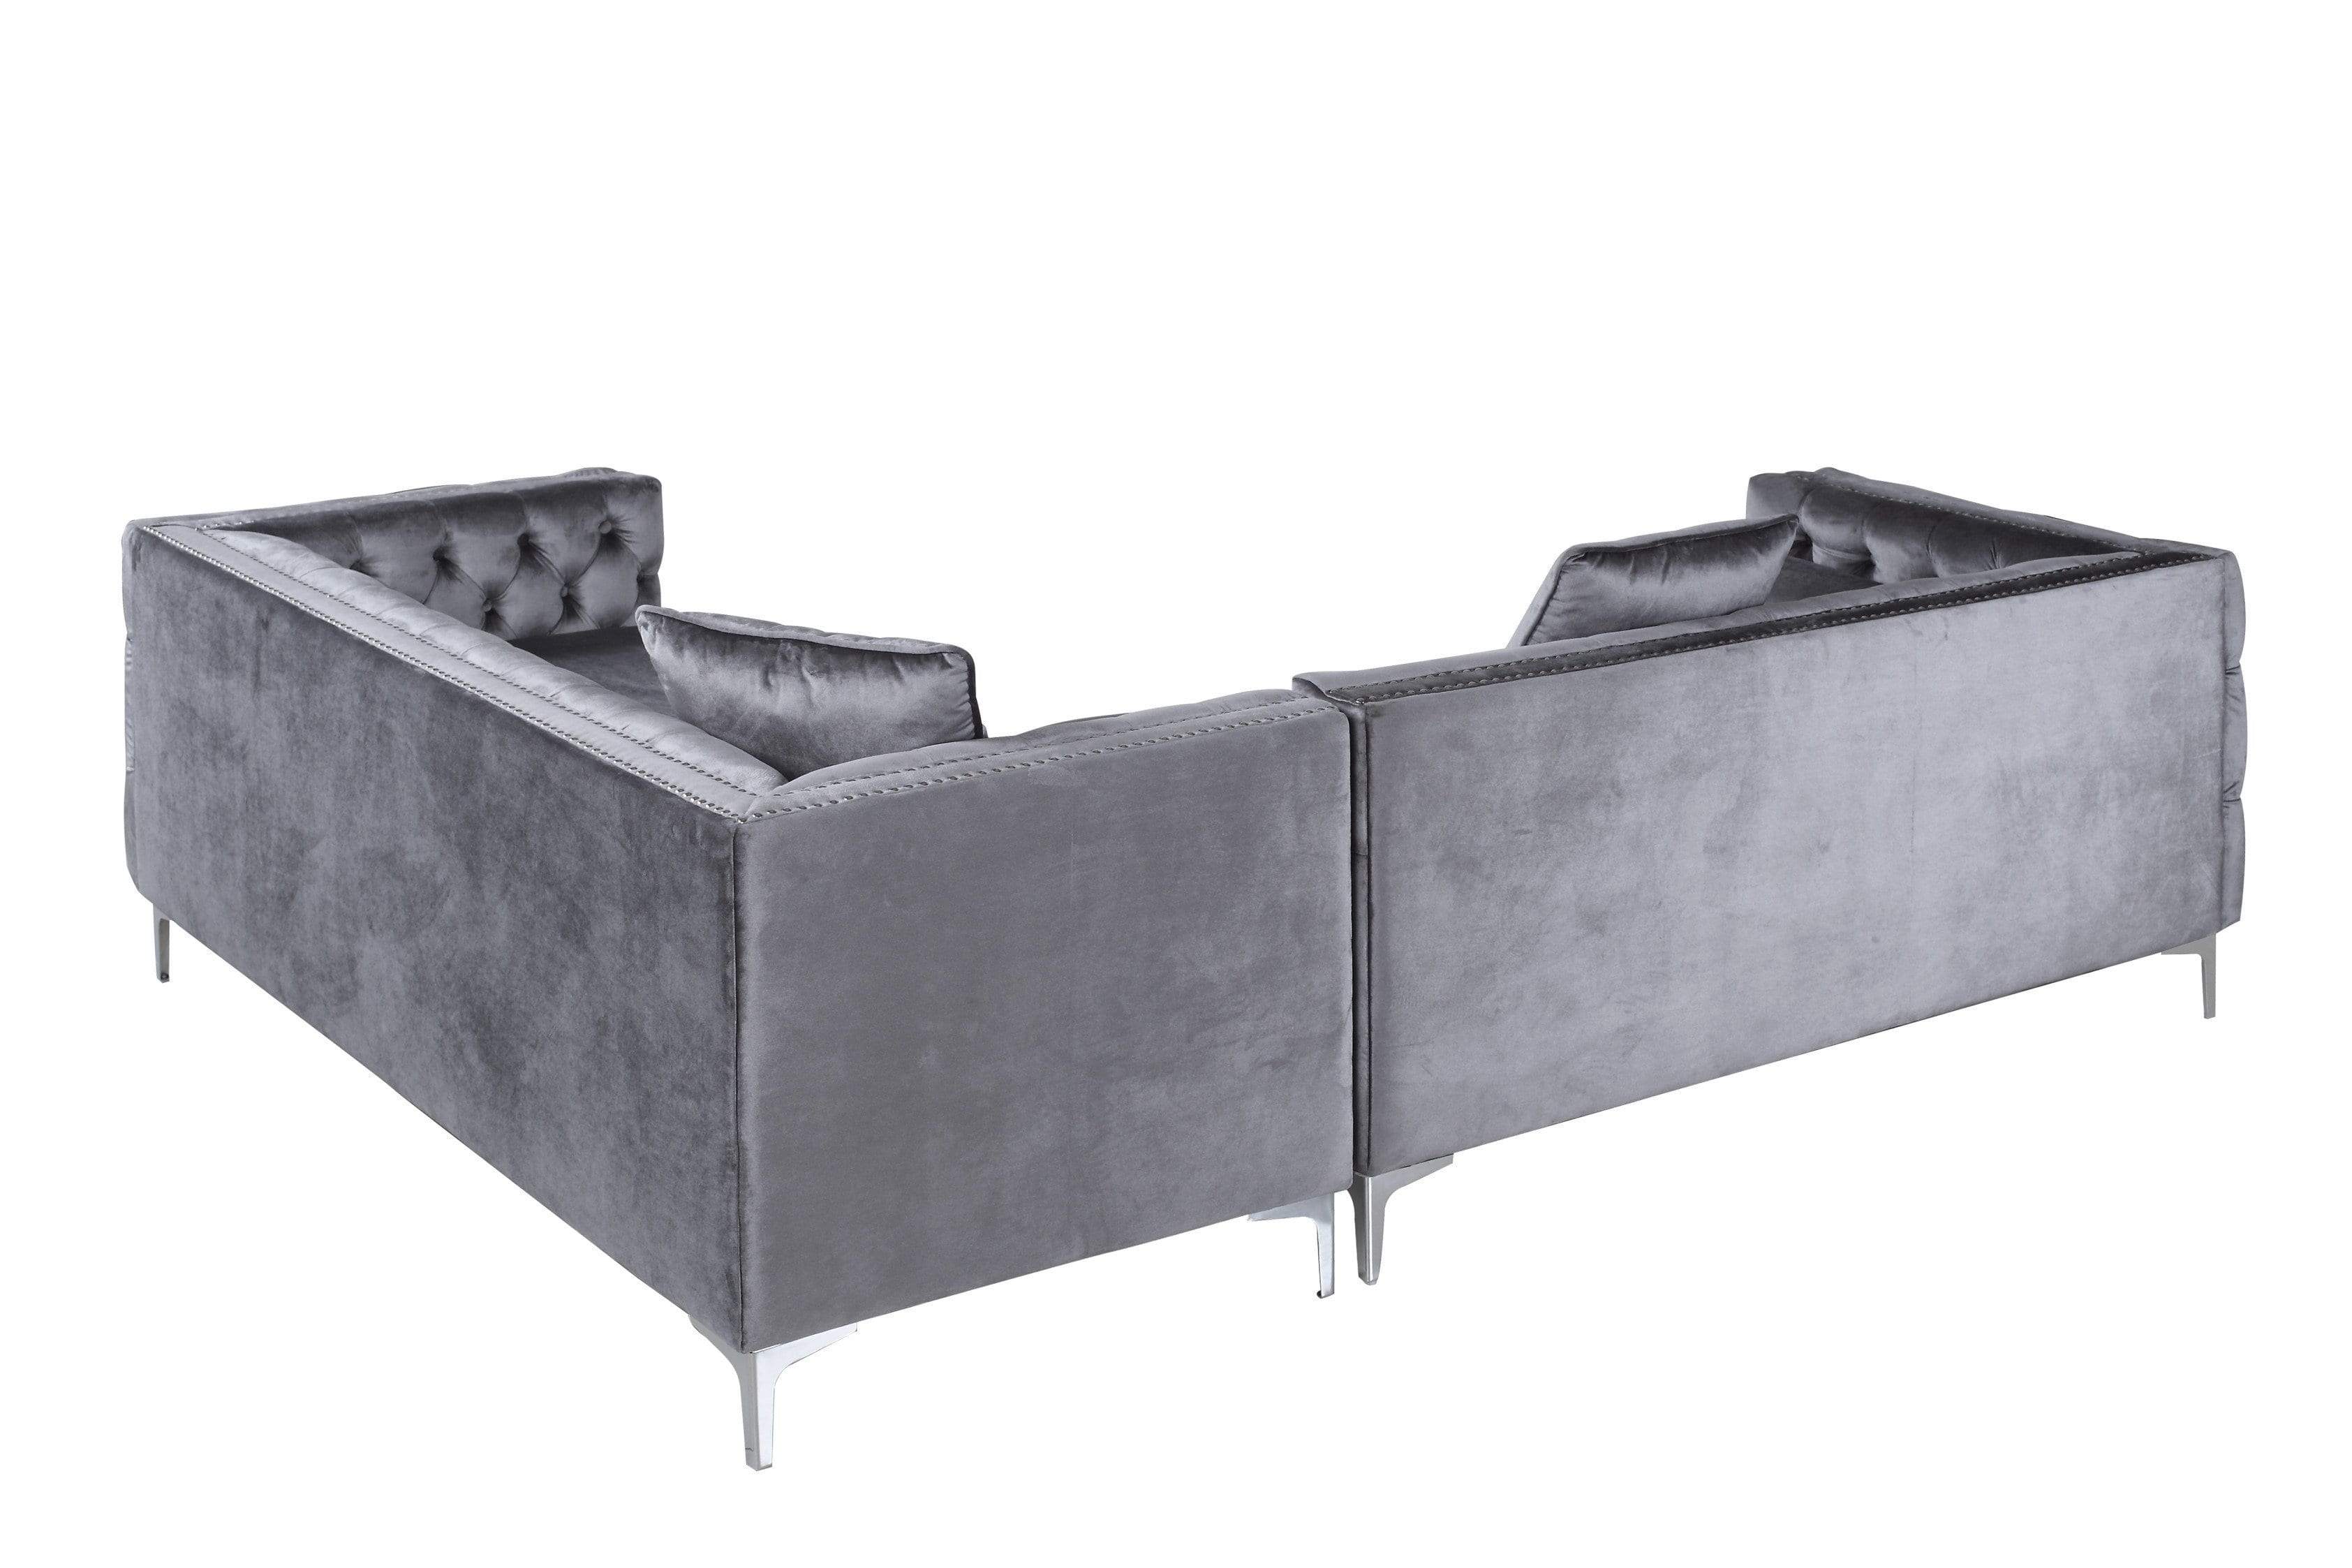 Susan Right Facing Tufted Velvet Sectional Sofa